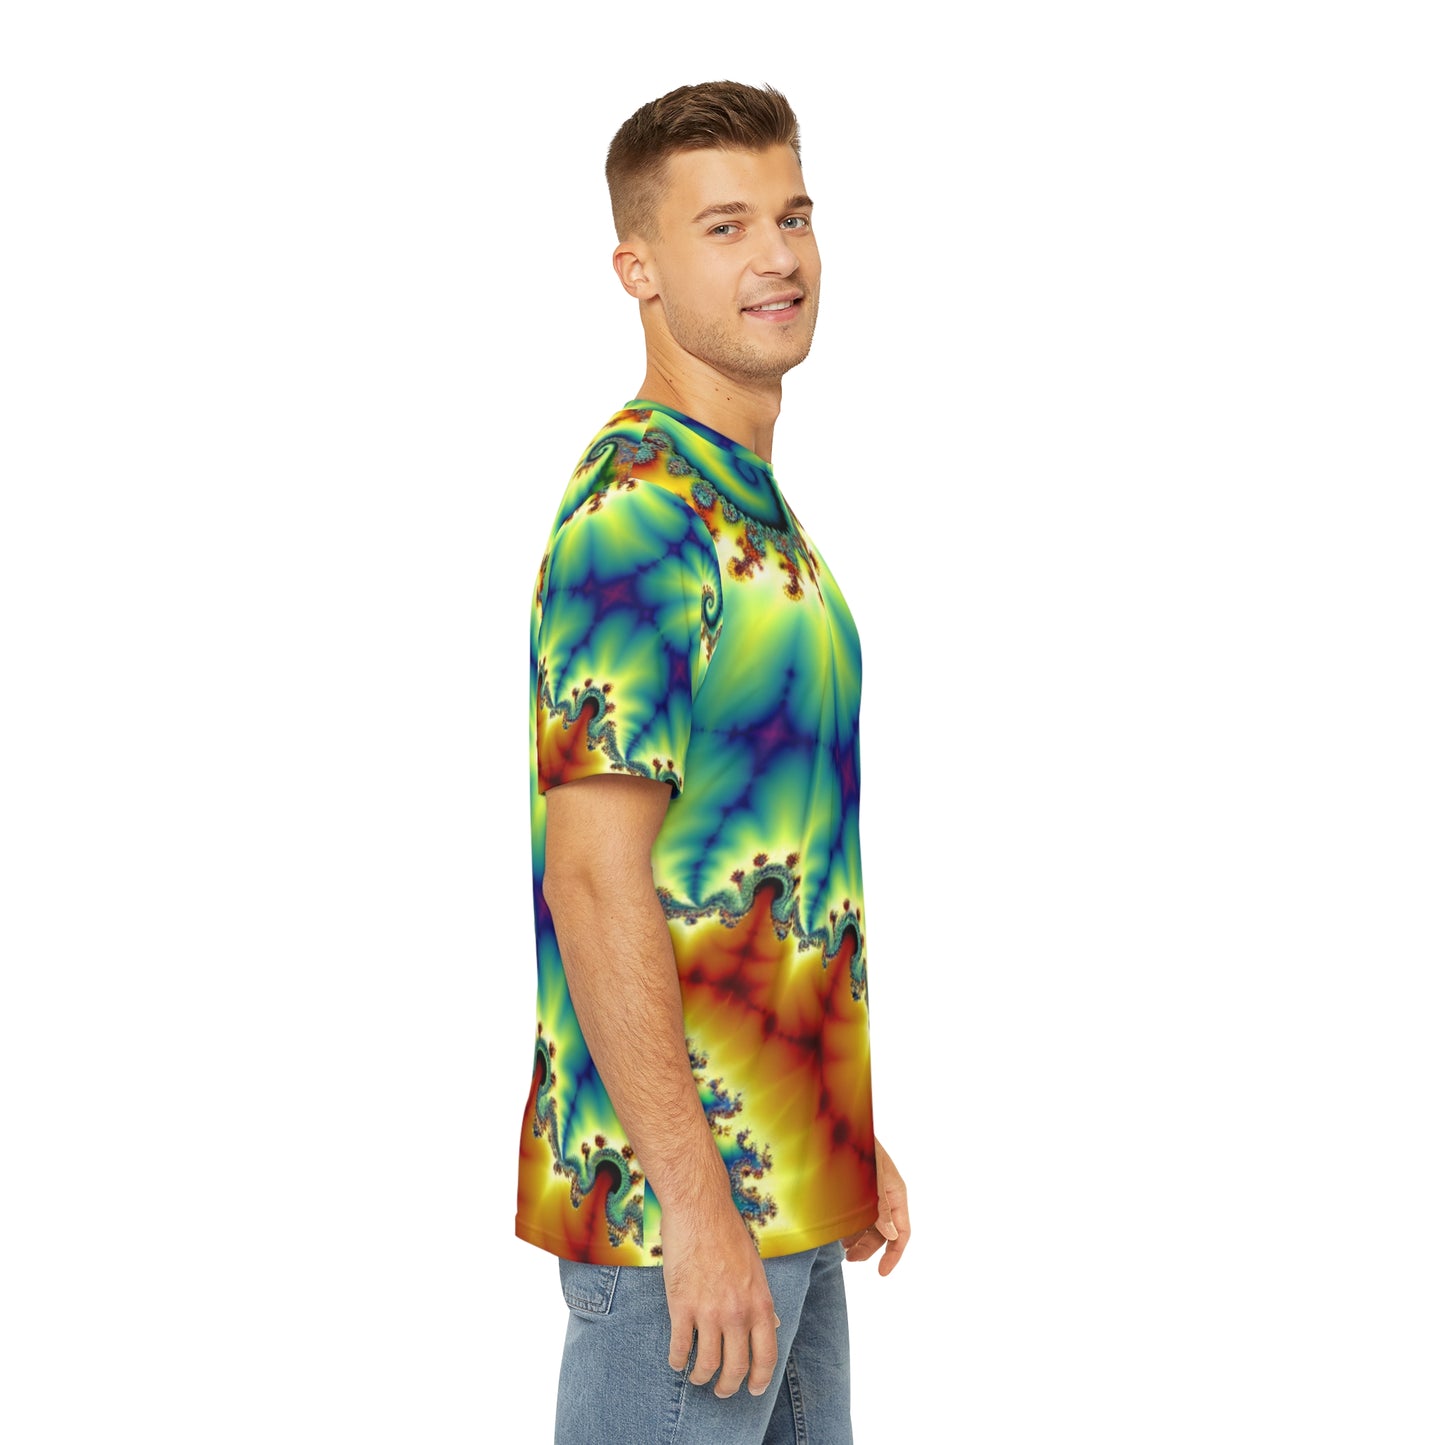 Side view of the Spectral Helix Dreamatorium Crewneck Pullover All-Over Print Short-Sleeved Shirt yellow oranger red blue green purple spectral pattern paired with casual denim pants worn  by a white man